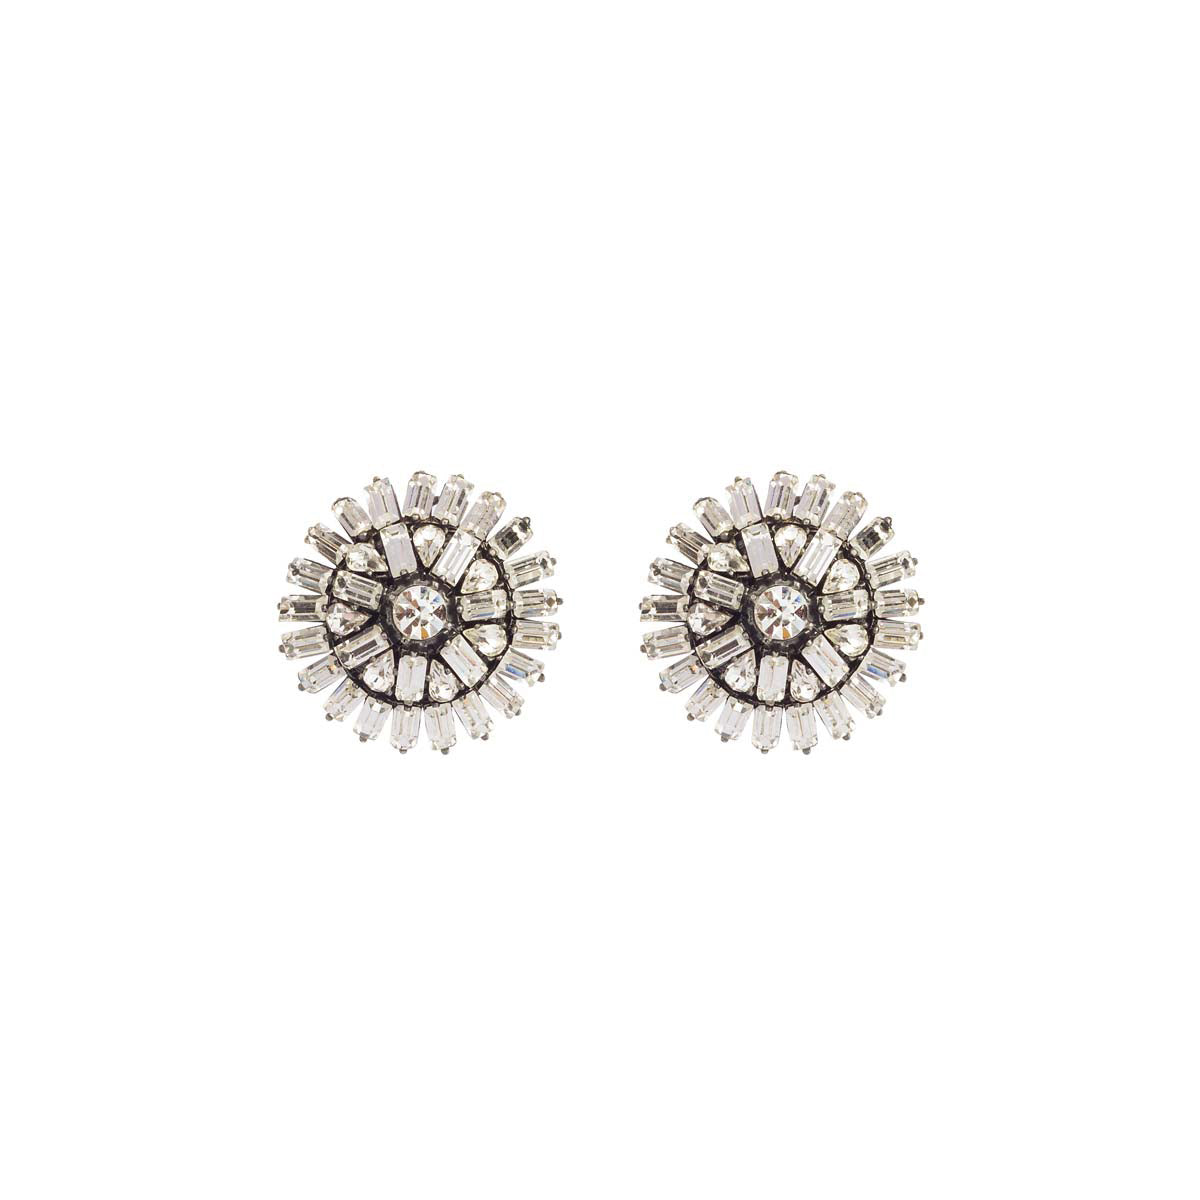 These earrings will be your ultimate rock when you need them the most! They are exquisite in their stone detailing with rhodium plating and luxurious Swarovski crystals.